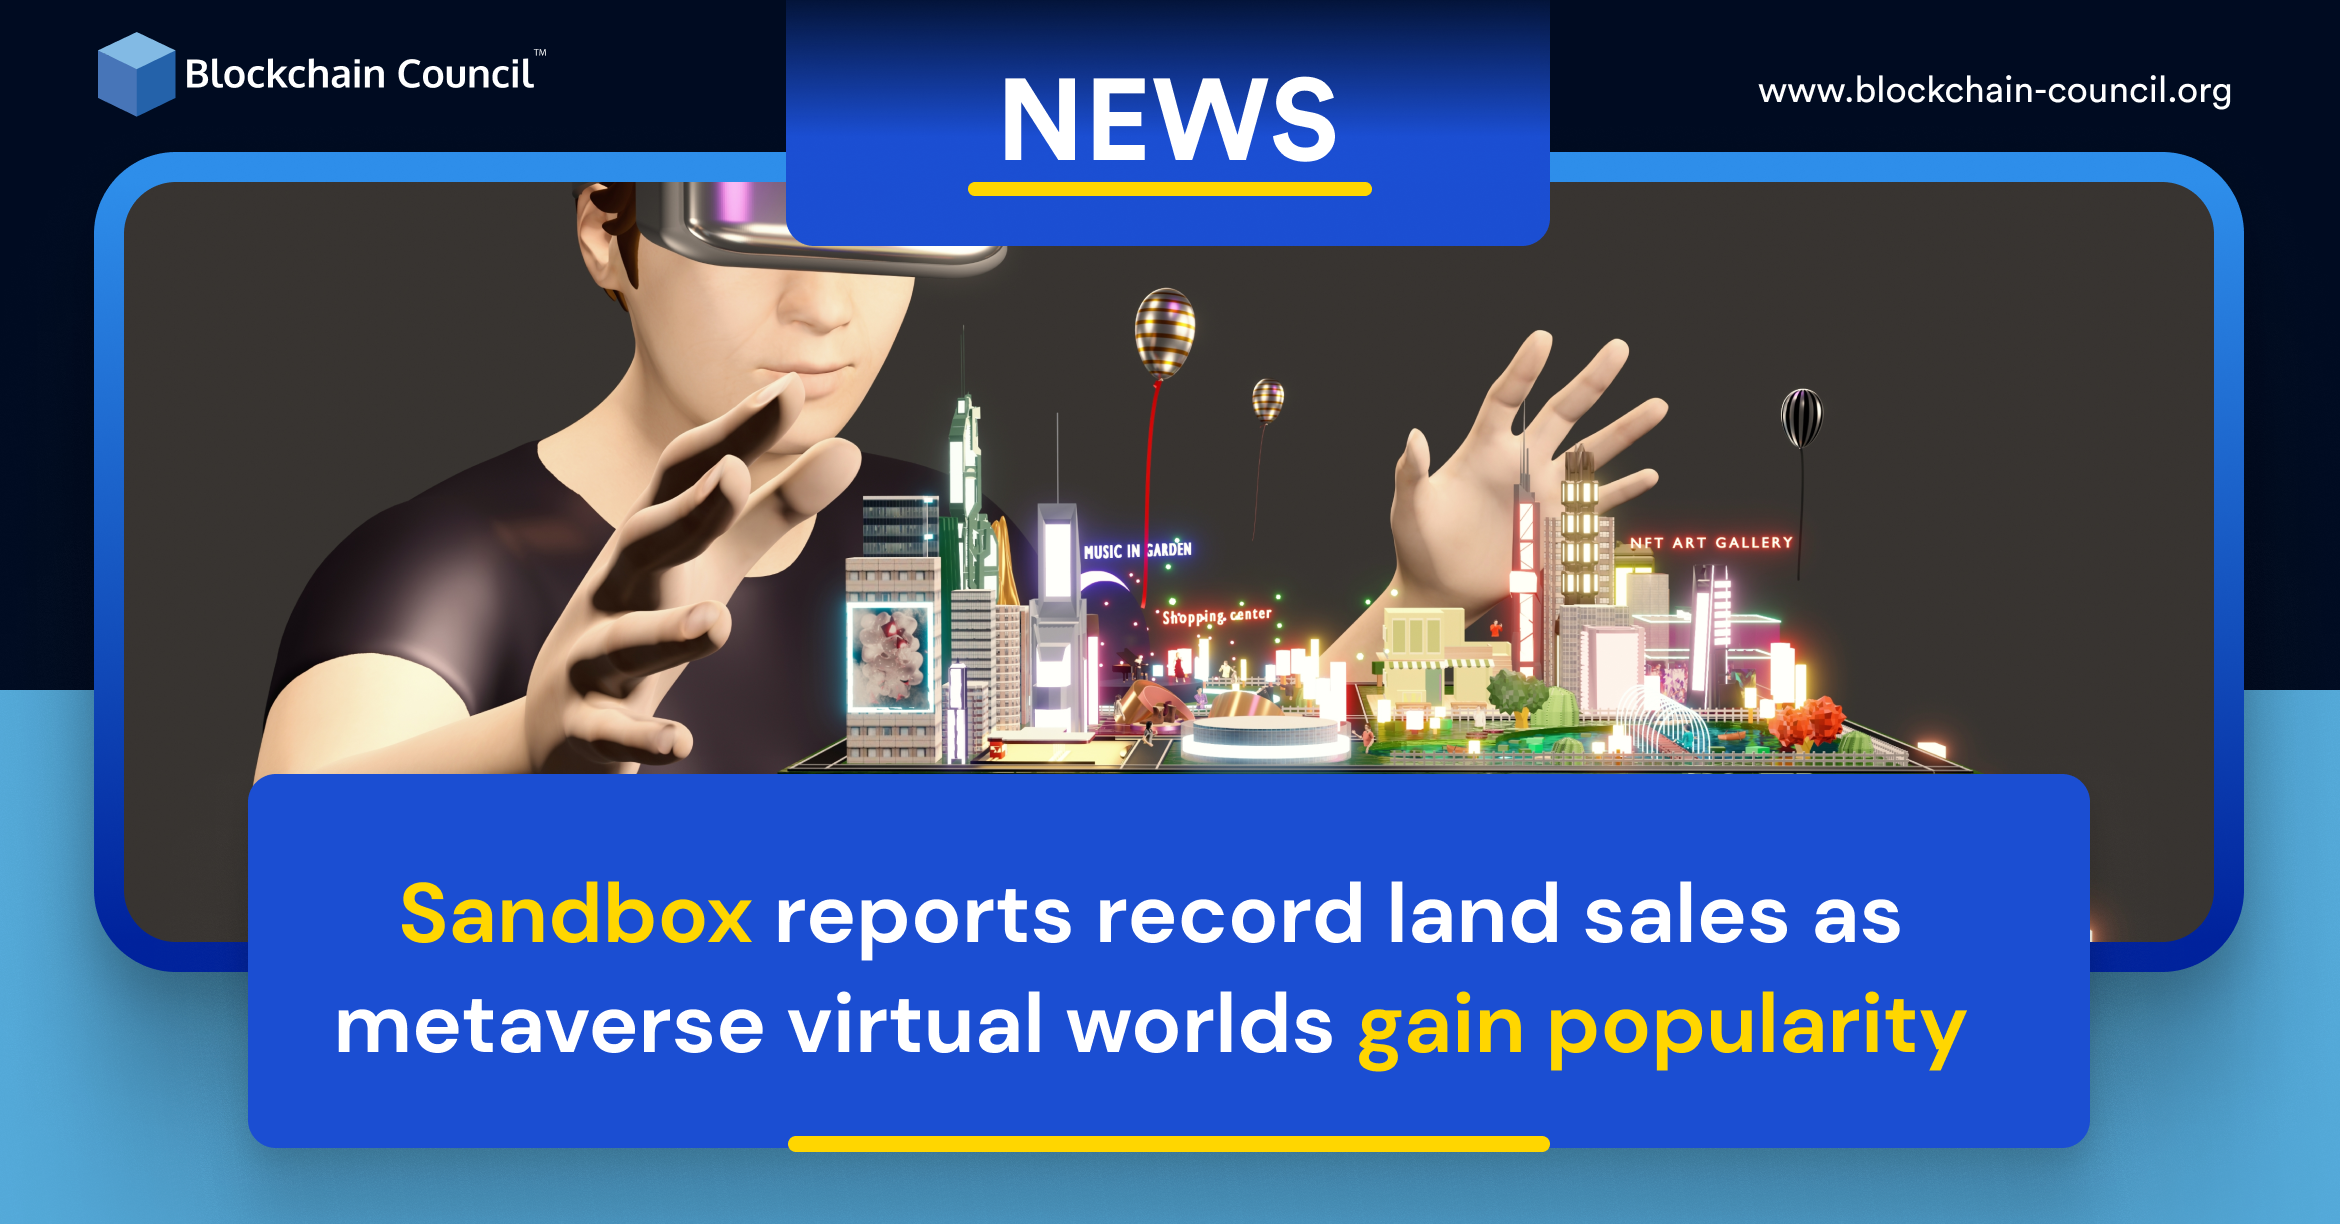 Sandbox Reports Record Land Sales as the Popularity of Metaverse Virtual Worlds Rises